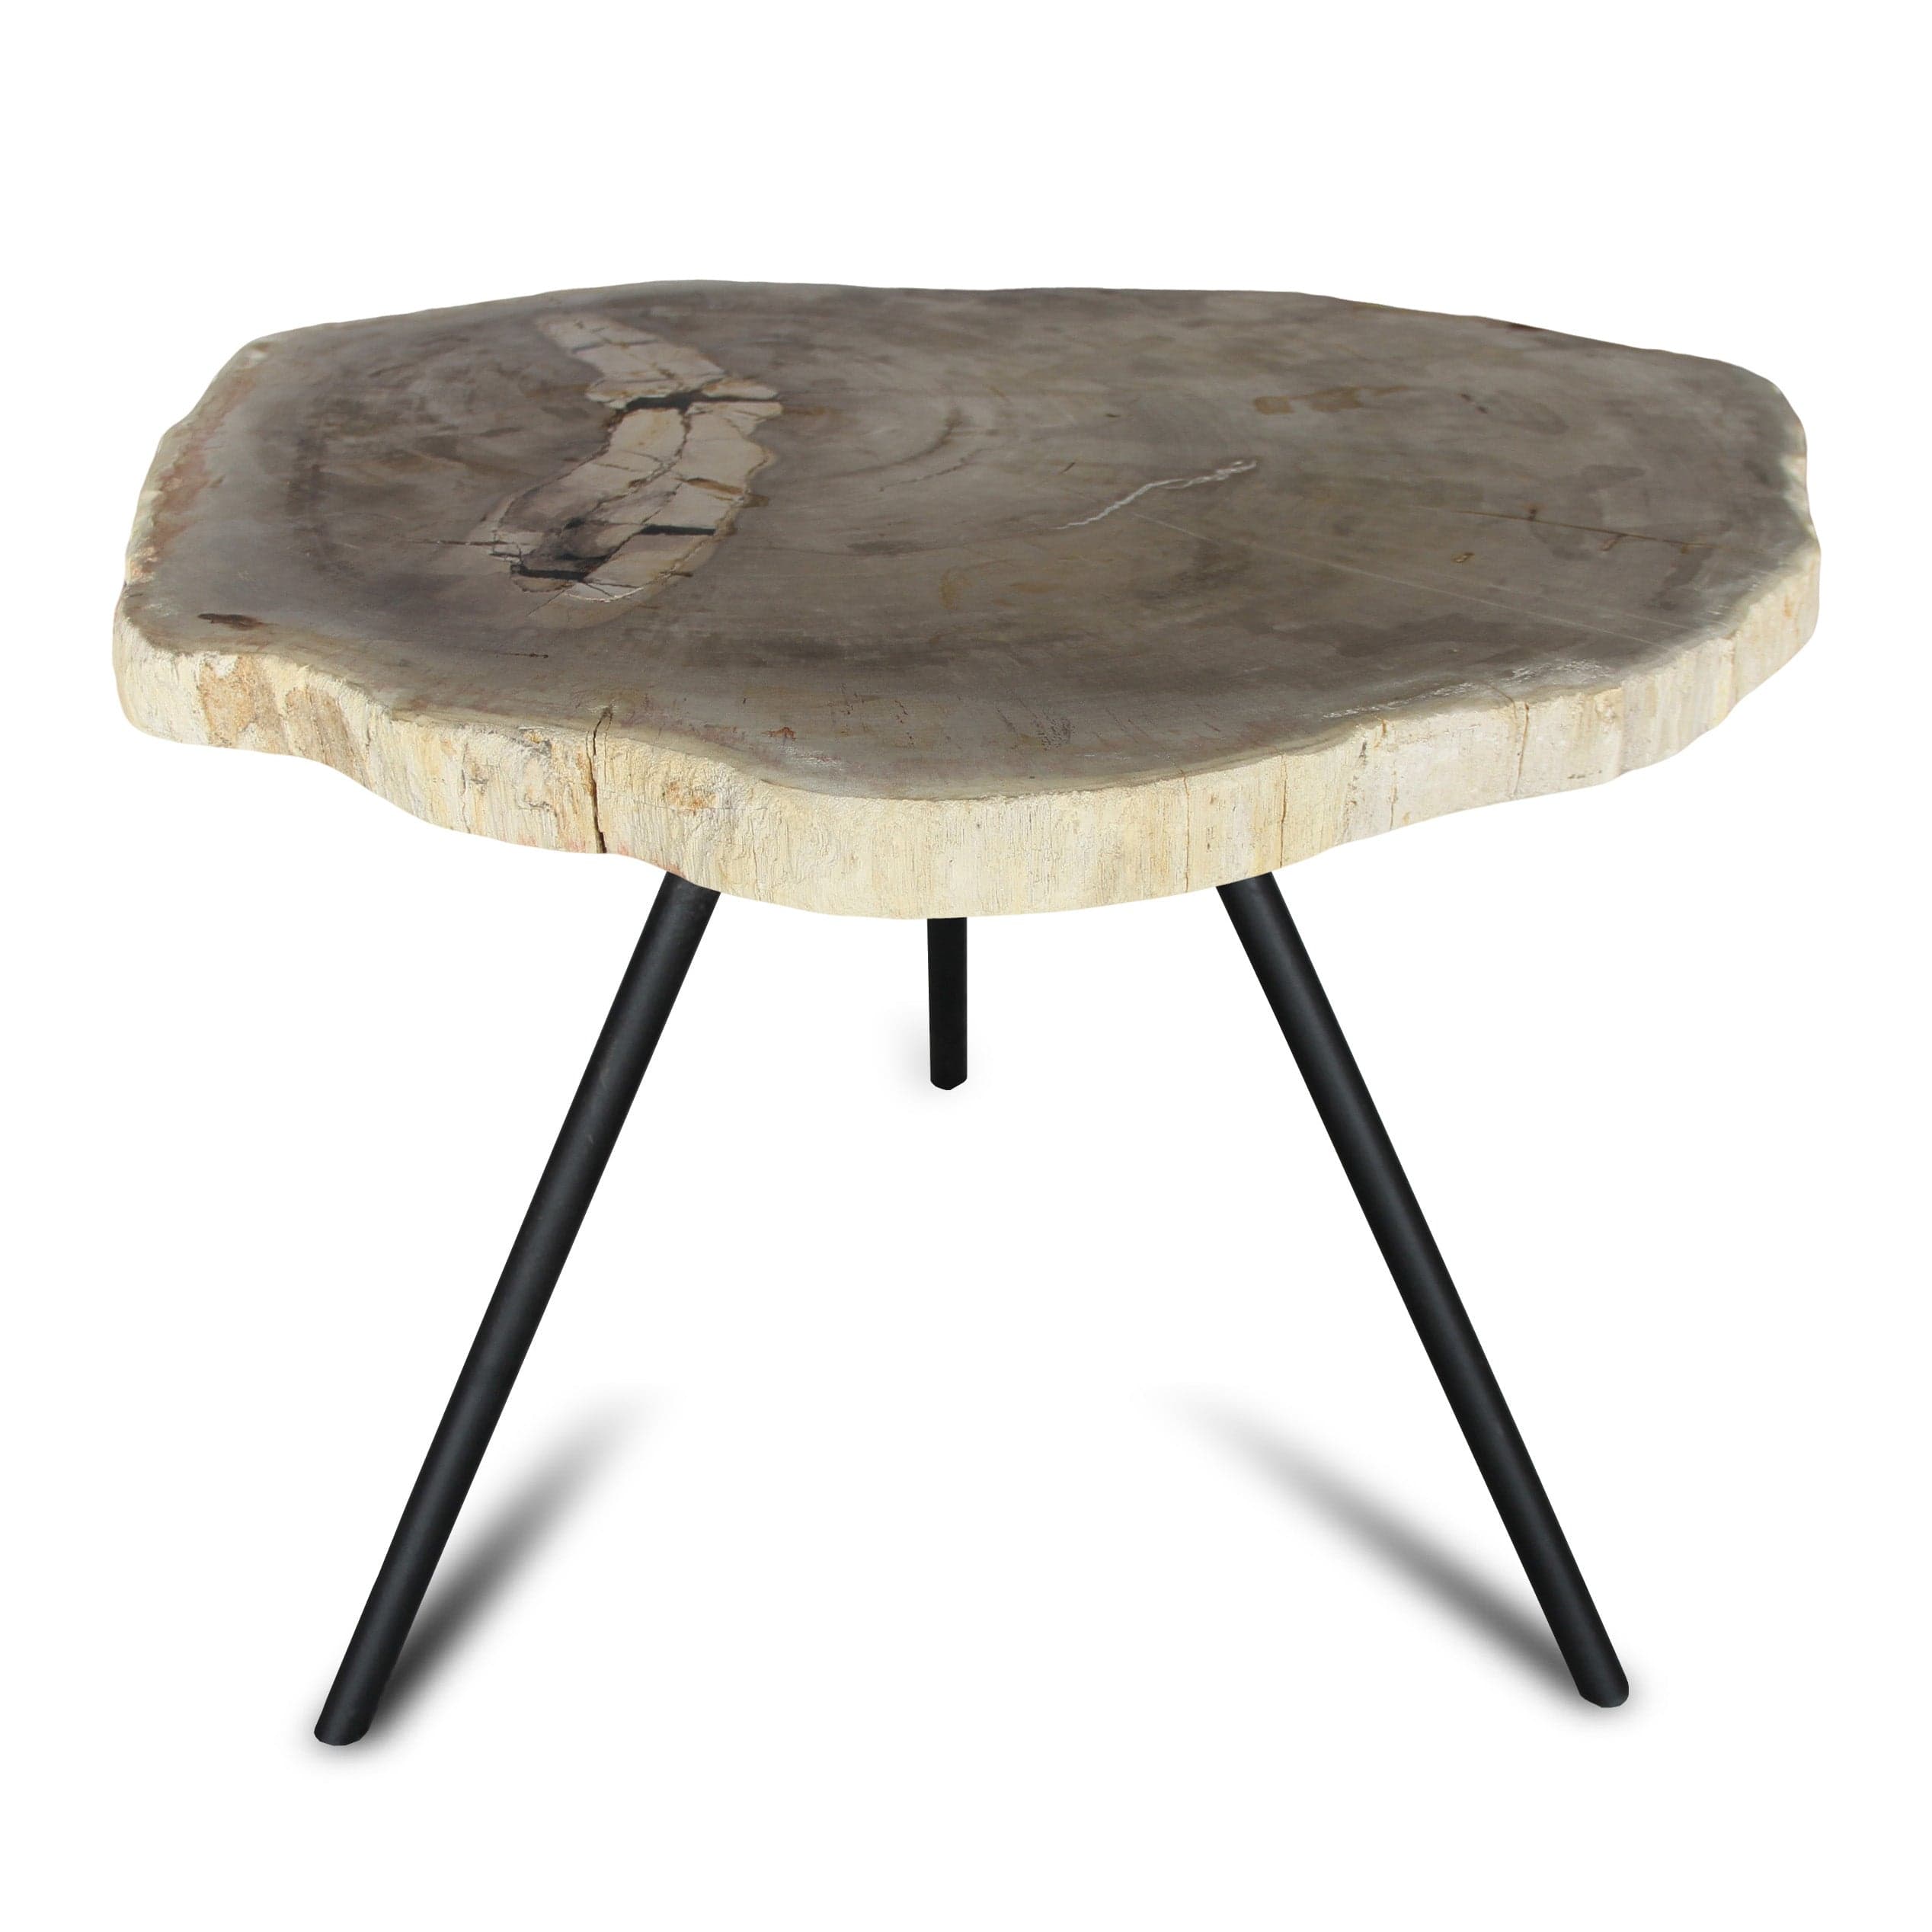 Kalifano Petrified Wood Petrified Wood Round Slice Side Table from Indonesia - 29" / 77 lbs PWT2800.001